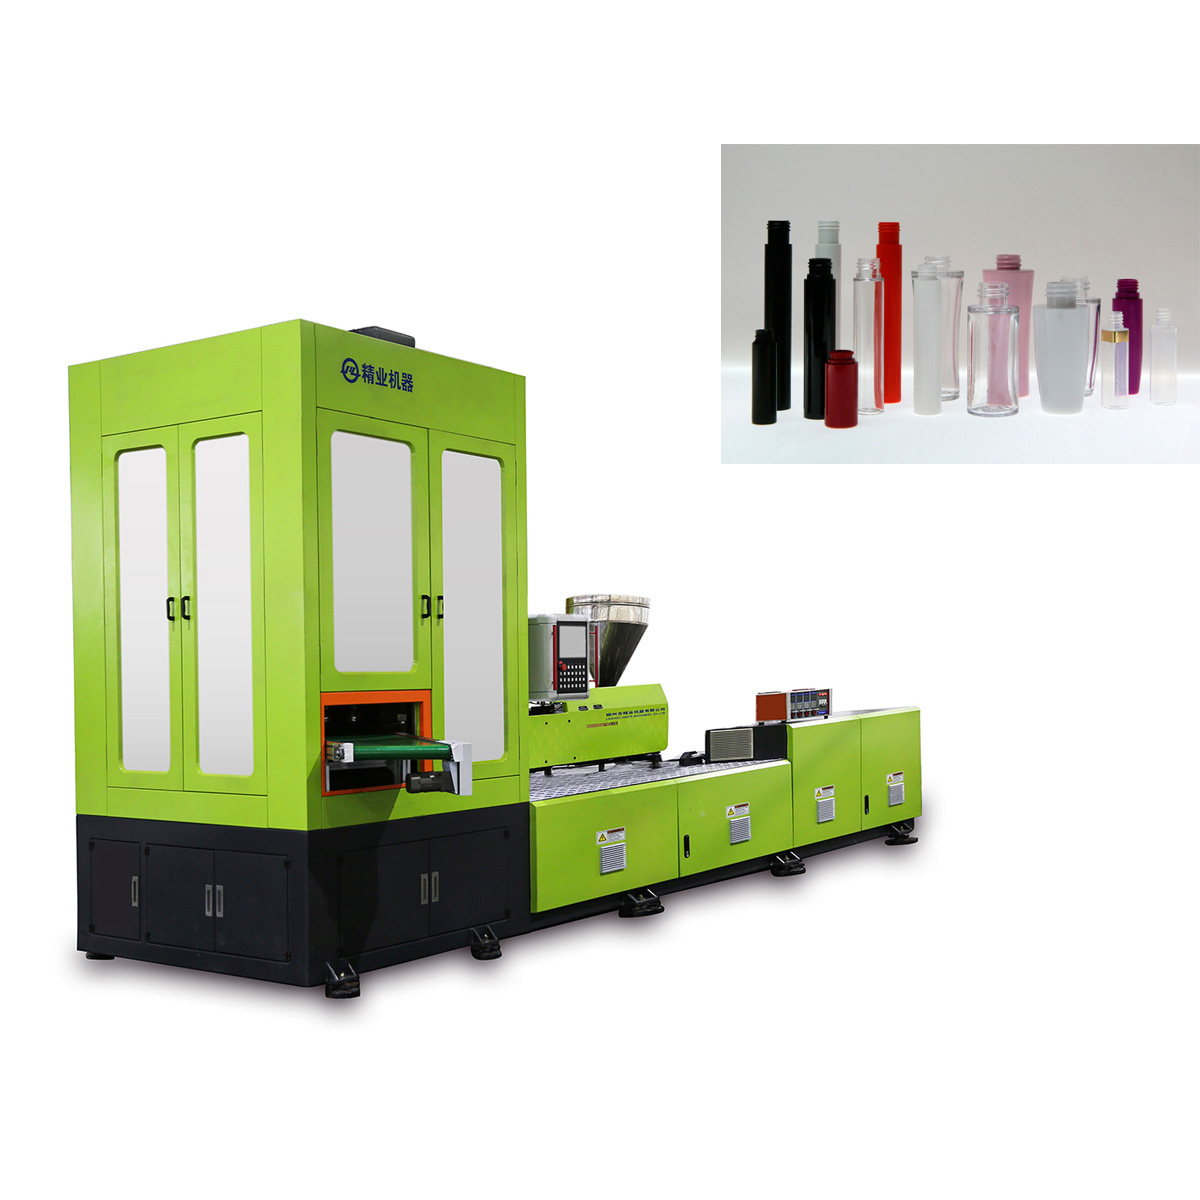 Single Stage Injection Stretch Blow Molding (ISBM) Machine For Making Cosmetic Packaging Bottles